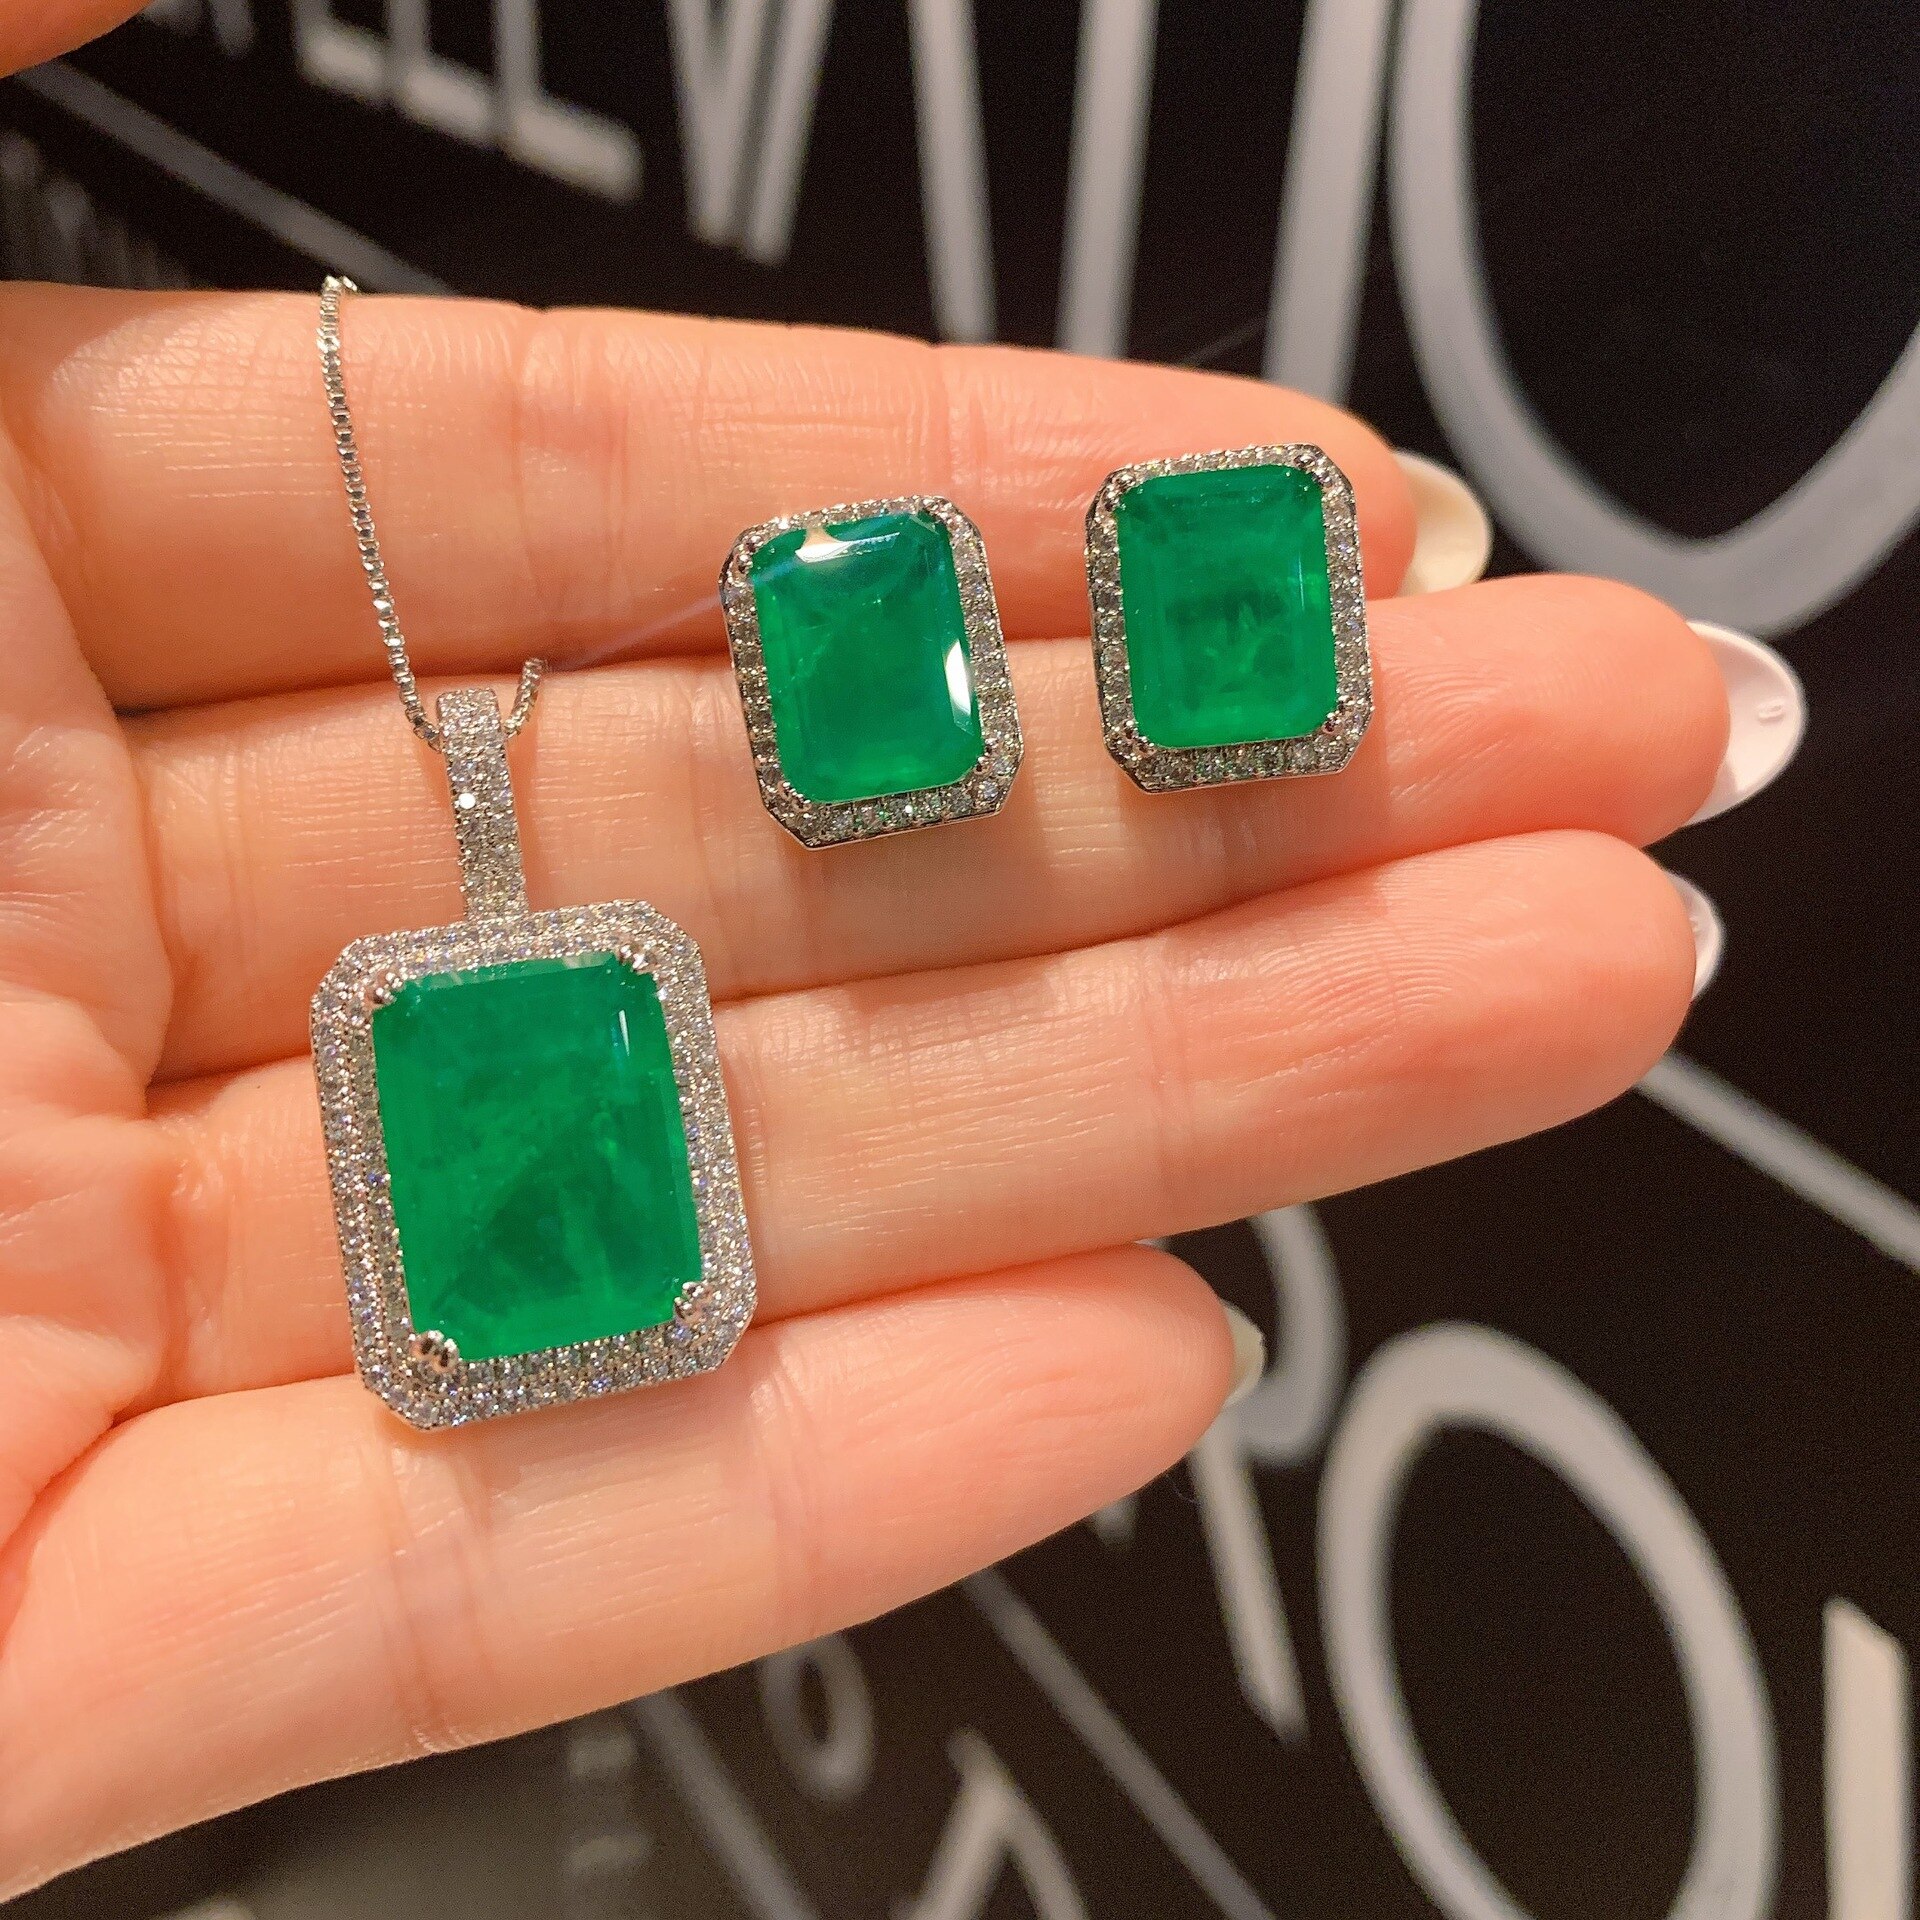 Square-Emerald-High-Carbon-Diamond-Pendant-Necklace-Earrings-Party-Bridesmaid-Gift-Korean-Accessories-Ear-Cuffs-Vintage.jpg